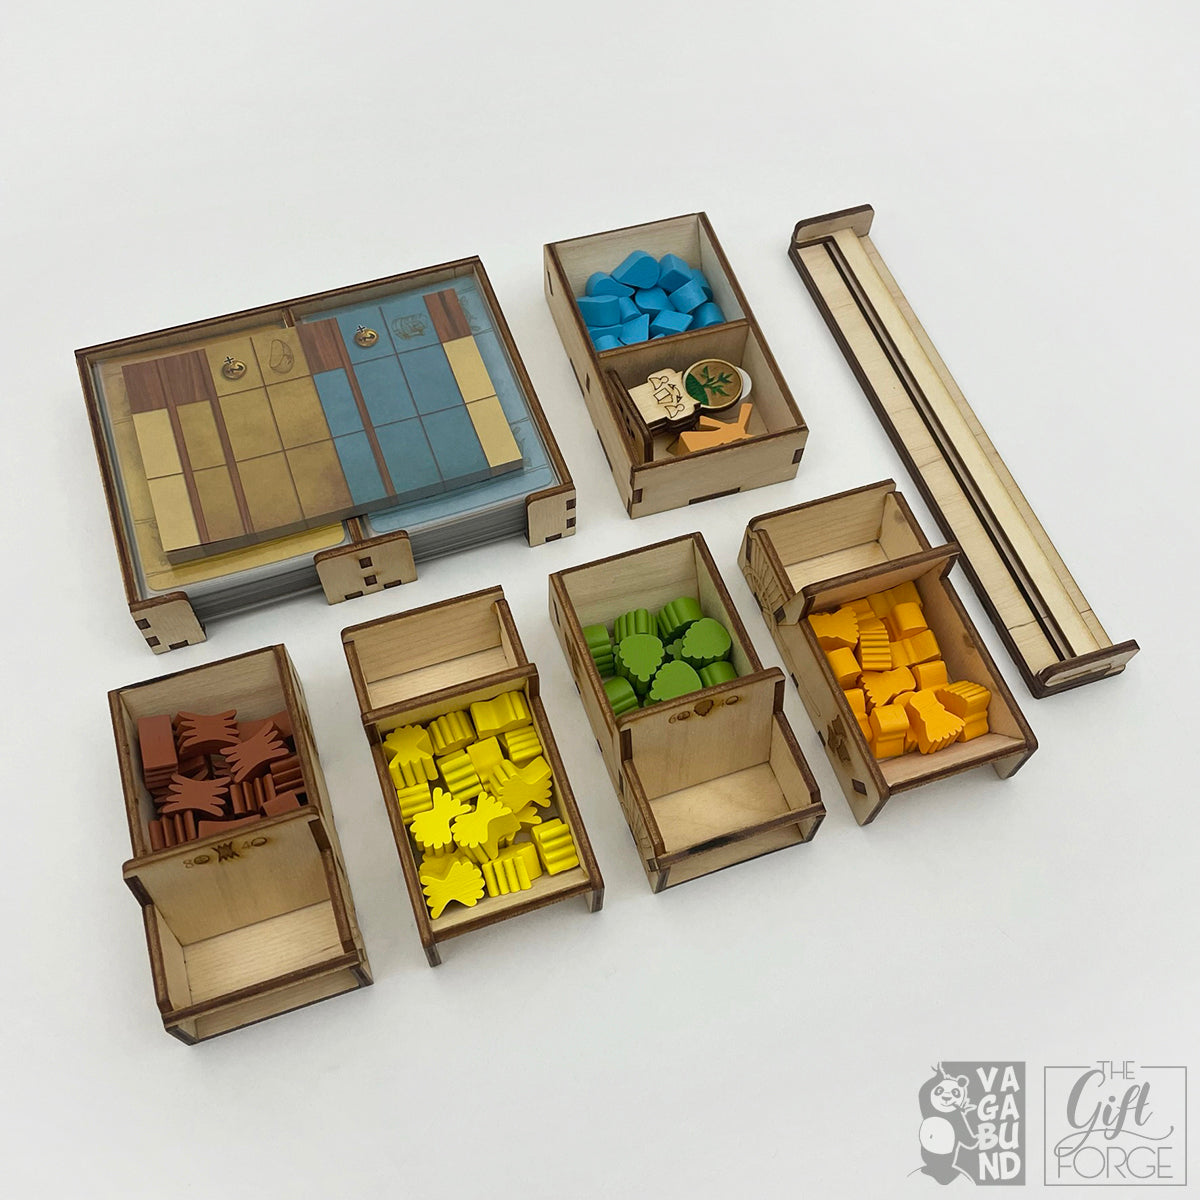 Insert compatible with Brass: Birmingham - The GiftForge